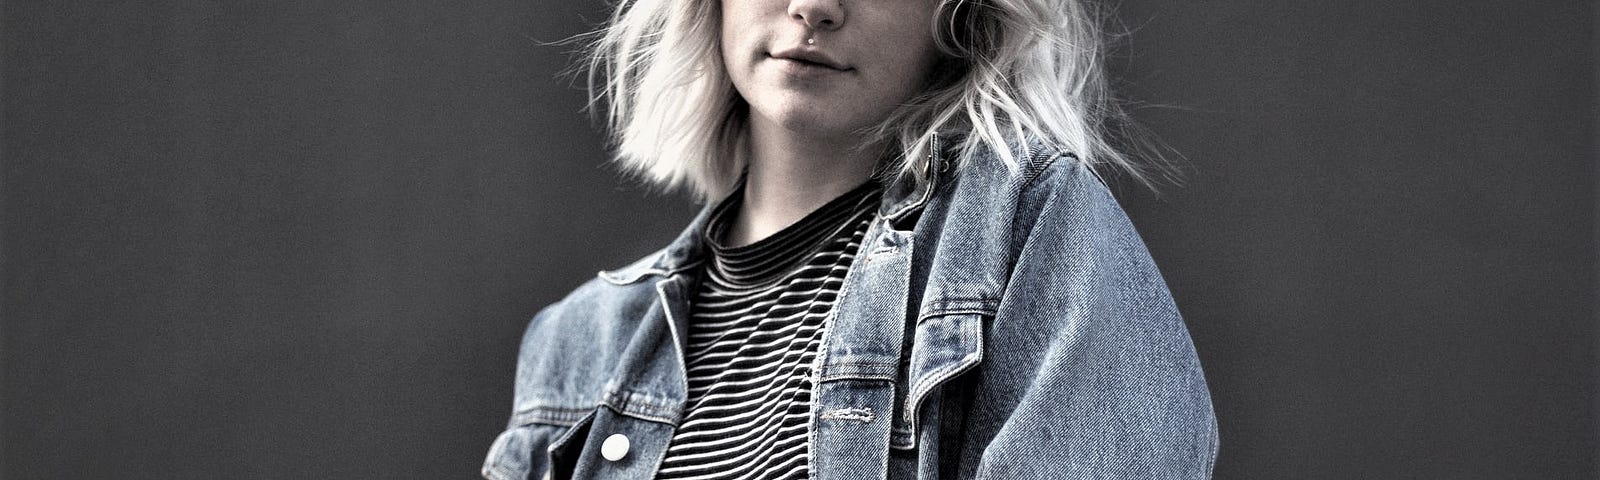 pensive girl with blonde hair wearing denim jacket and striped shirt against dark background